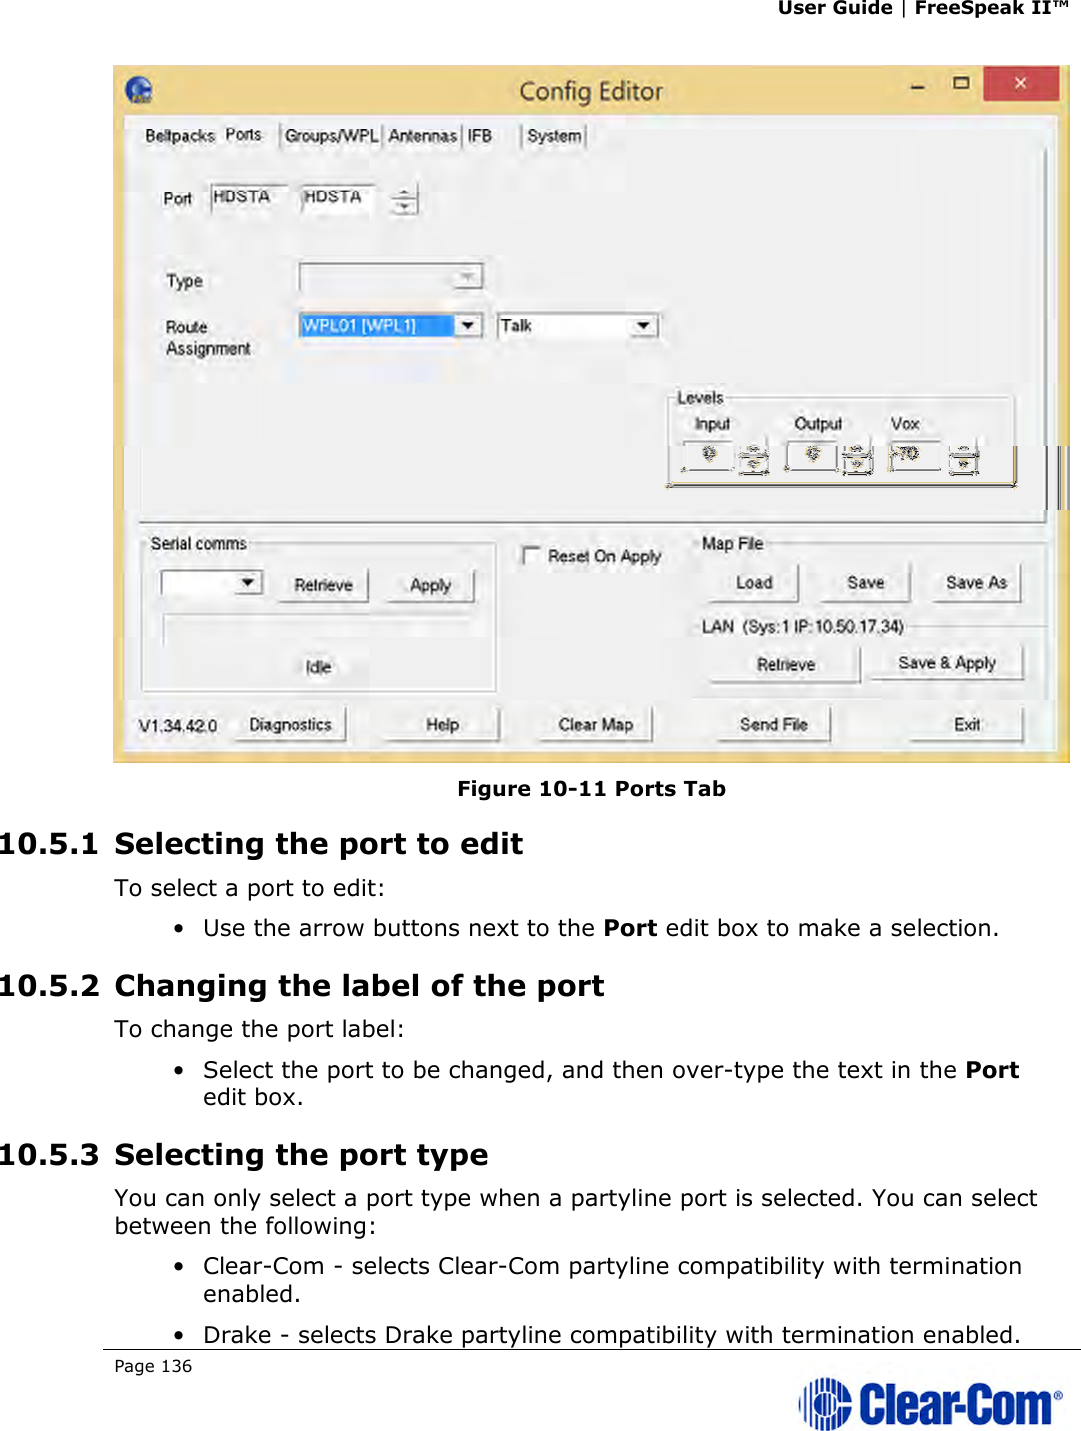 User Guide | FreeSpeak II™  Page 136    Figure 10-11 Ports Tab 10.5.1 Selecting the port to edit To select a port to edit: • Use the arrow buttons next to the Port edit box to make a selection. 10.5.2 Changing the label of the port To change the port label: • Select the port to be changed, and then over-type the text in the Port edit box. 10.5.3 Selecting the port type You can only select a port type when a partyline port is selected. You can select between the following: • Clear-Com - selects Clear-Com partyline compatibility with termination enabled. • Drake - selects Drake partyline compatibility with termination enabled. 